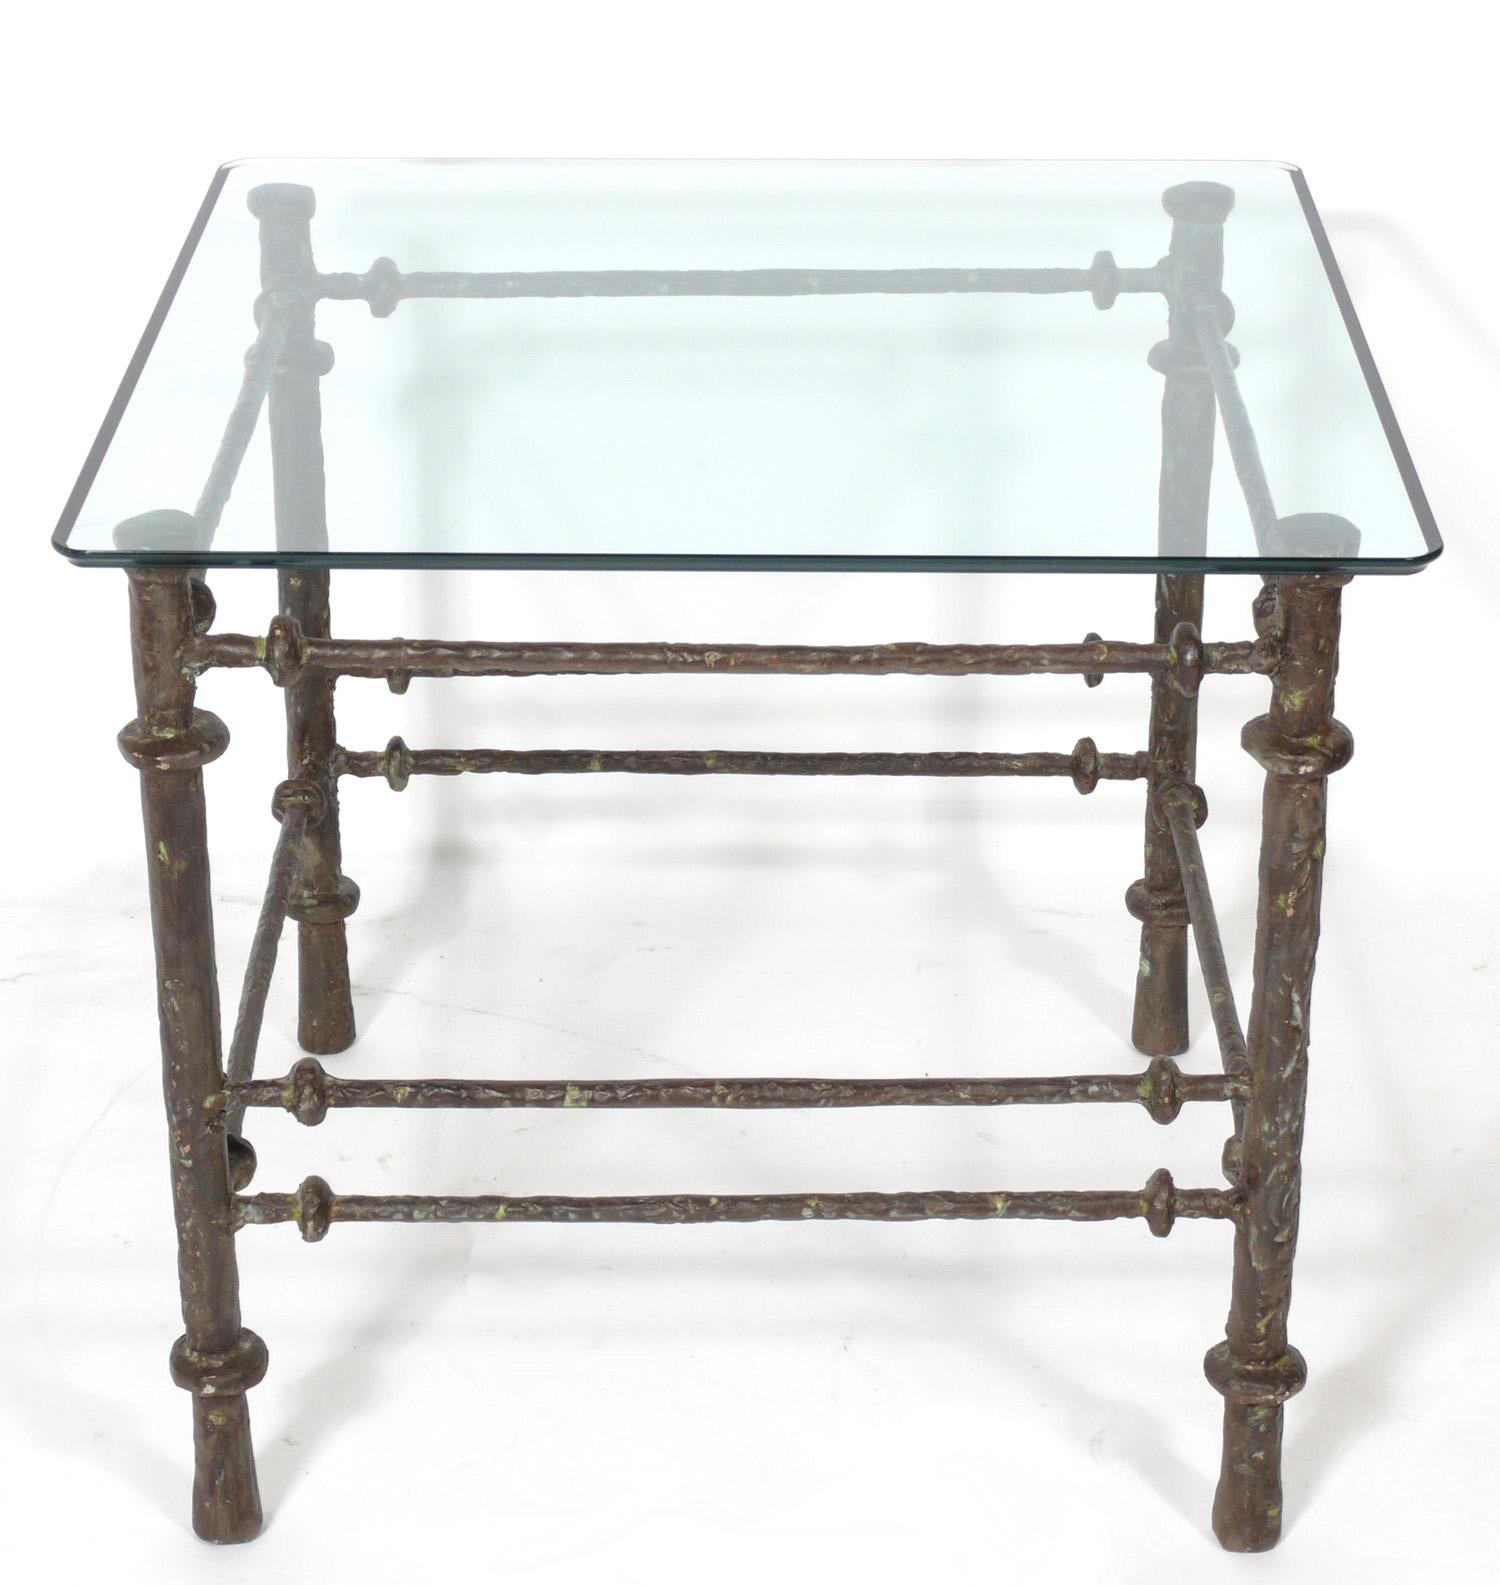 Sculptural bronze finish table in the manner of Diego Giacometti, circa 1970s. Nicely patinated bronze painted finish. While this is not an authorized casting by Giacometti, it doesn't come with the $100,000 price tag of an original authorized